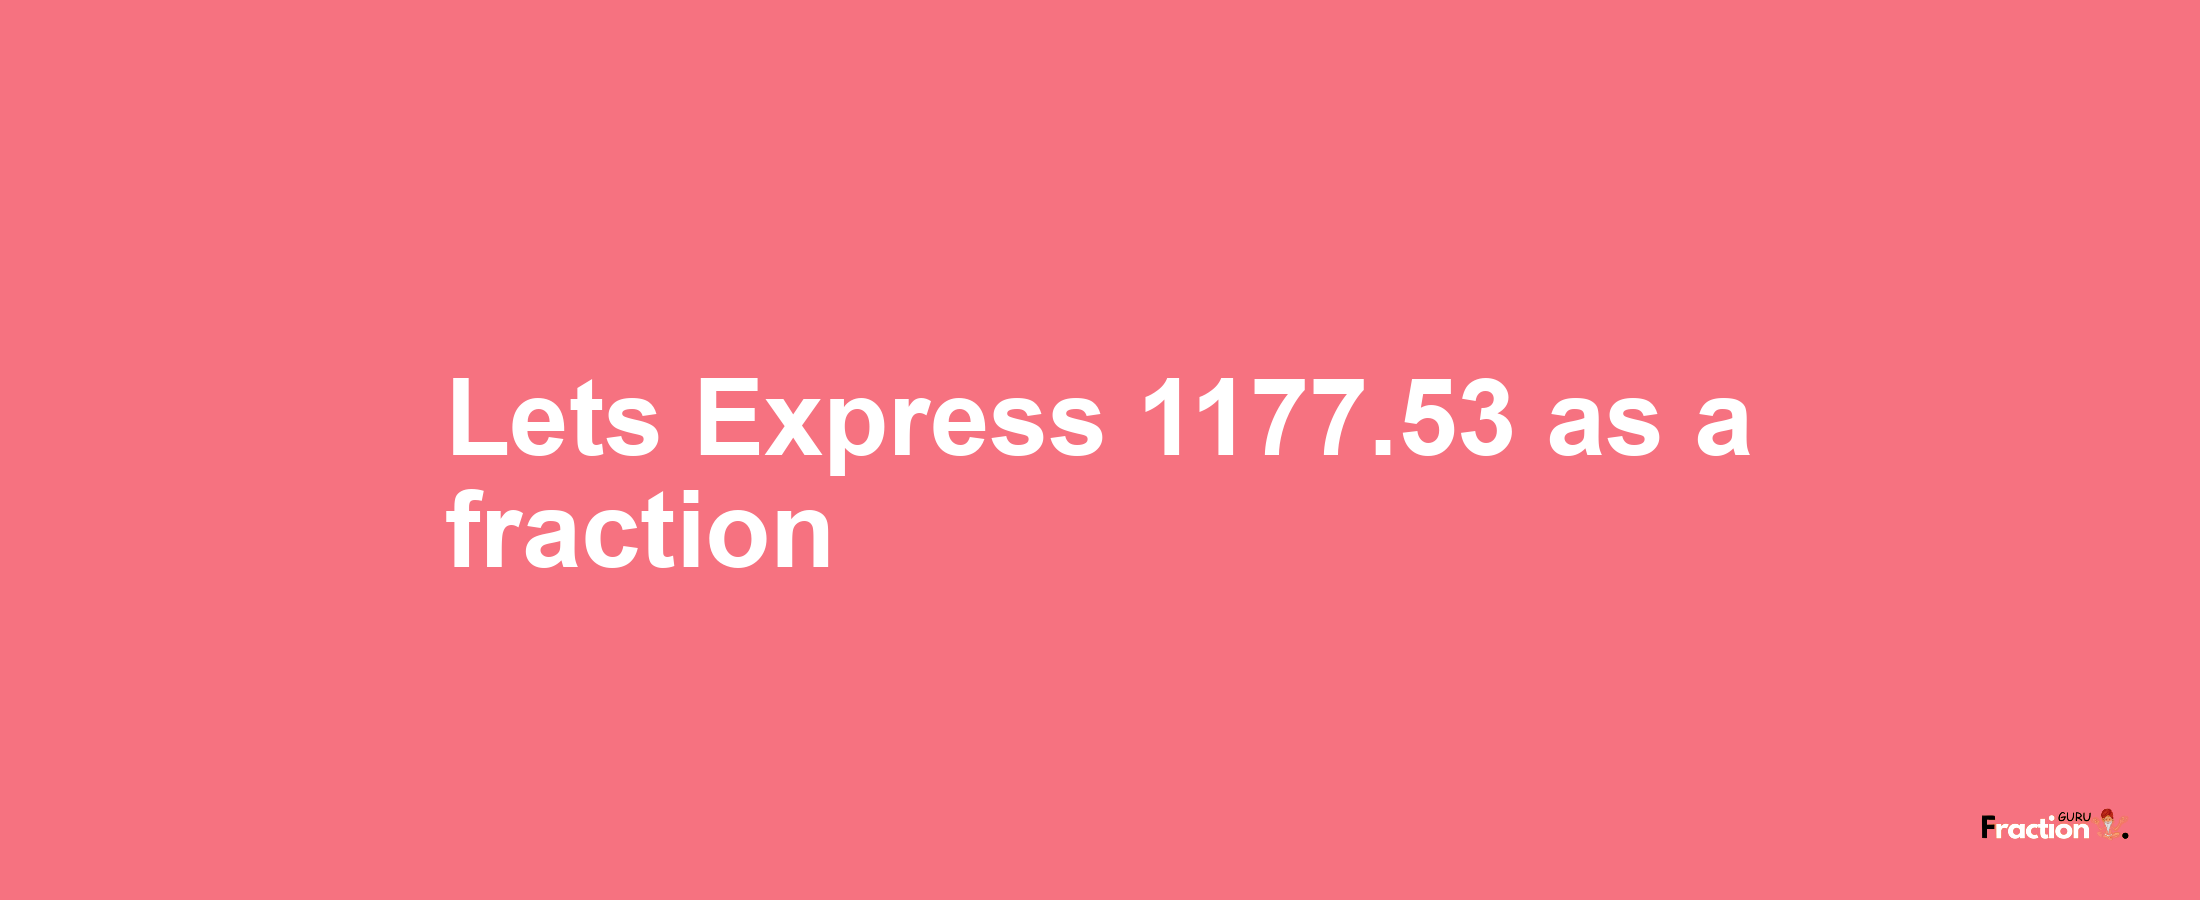 Lets Express 1177.53 as afraction